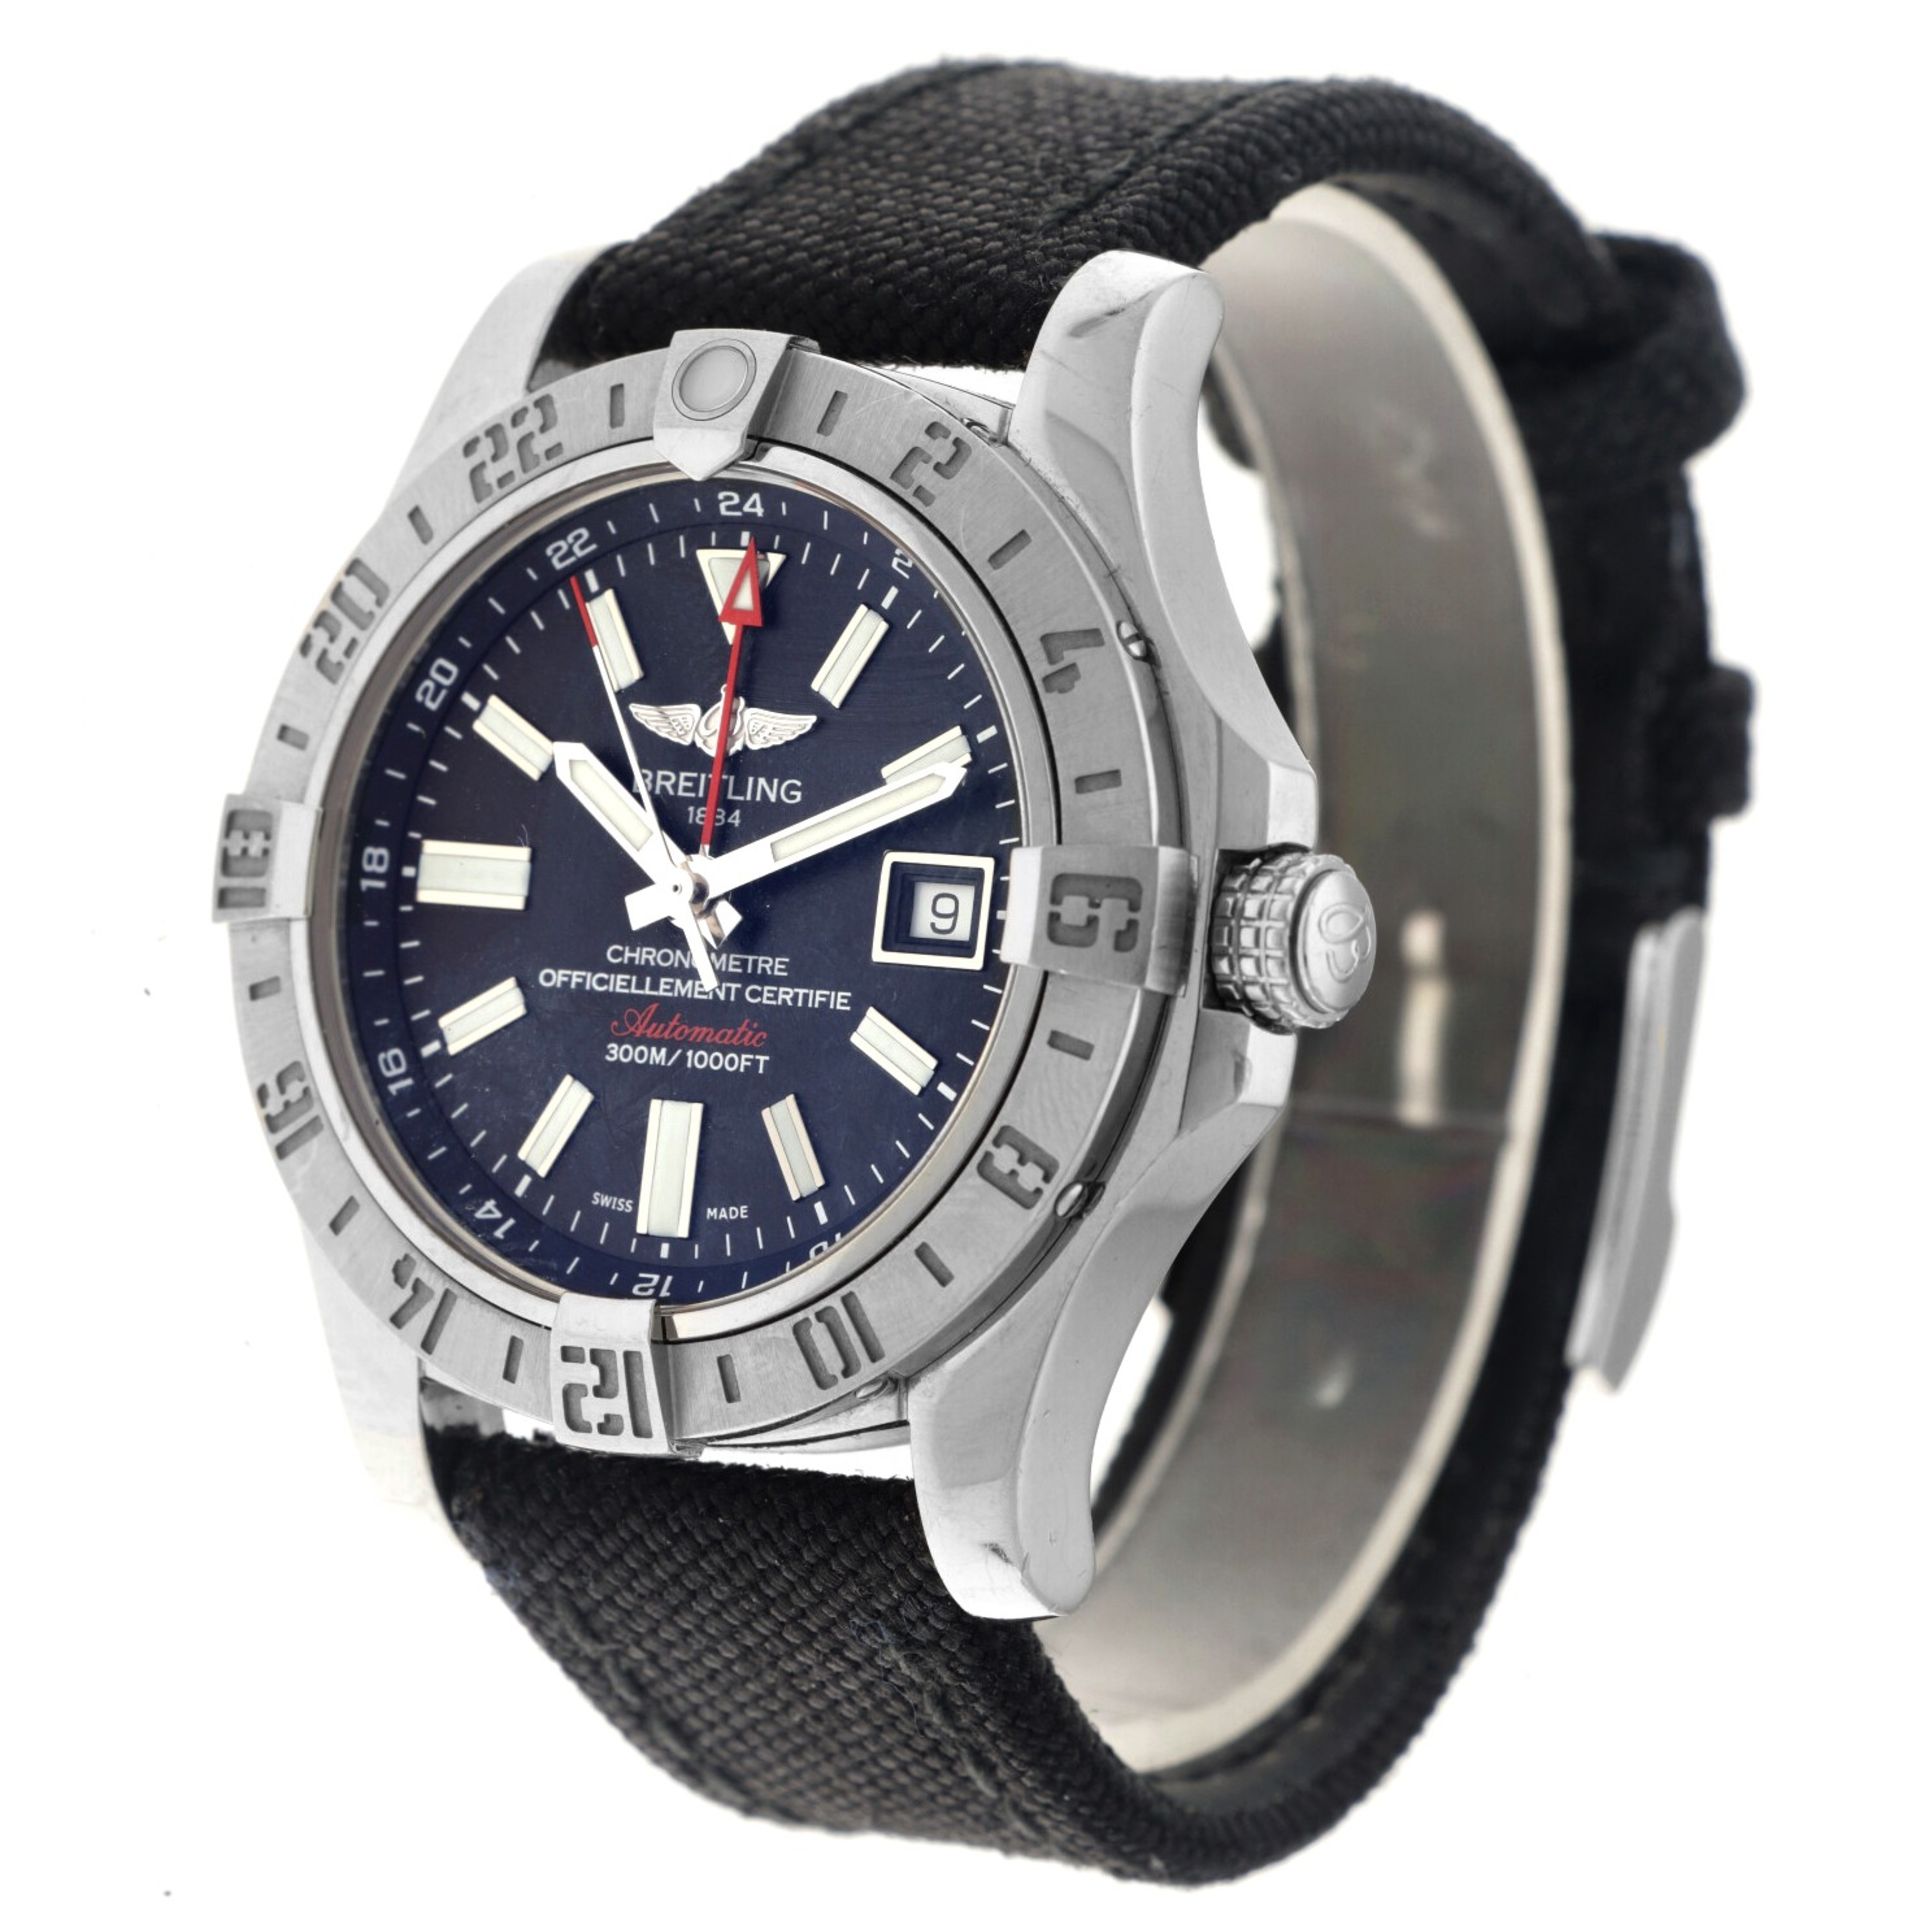 Breitling Avenger II GMT A32390 - Men's watch - 2014. - Image 2 of 6